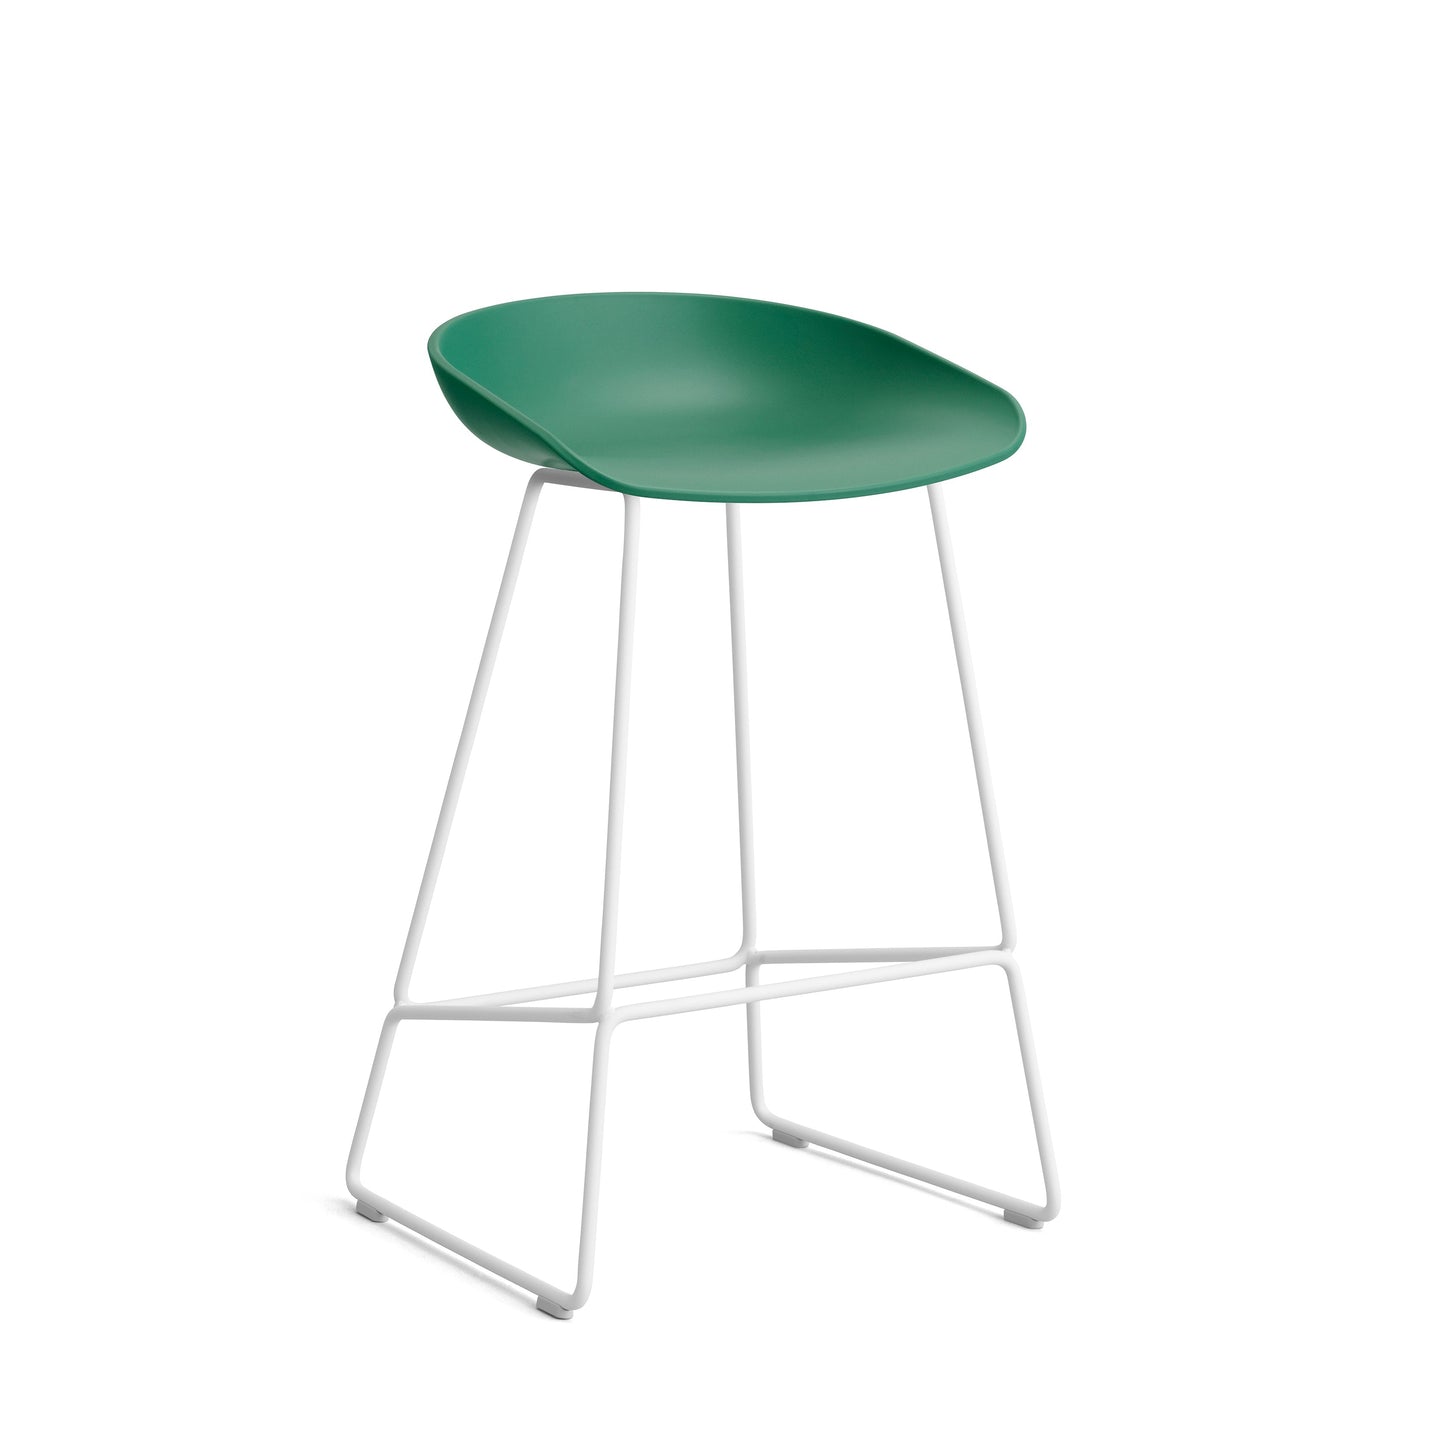 HAY About a Stool AAS 38 barkruk H65 wit Teal Green 2.0